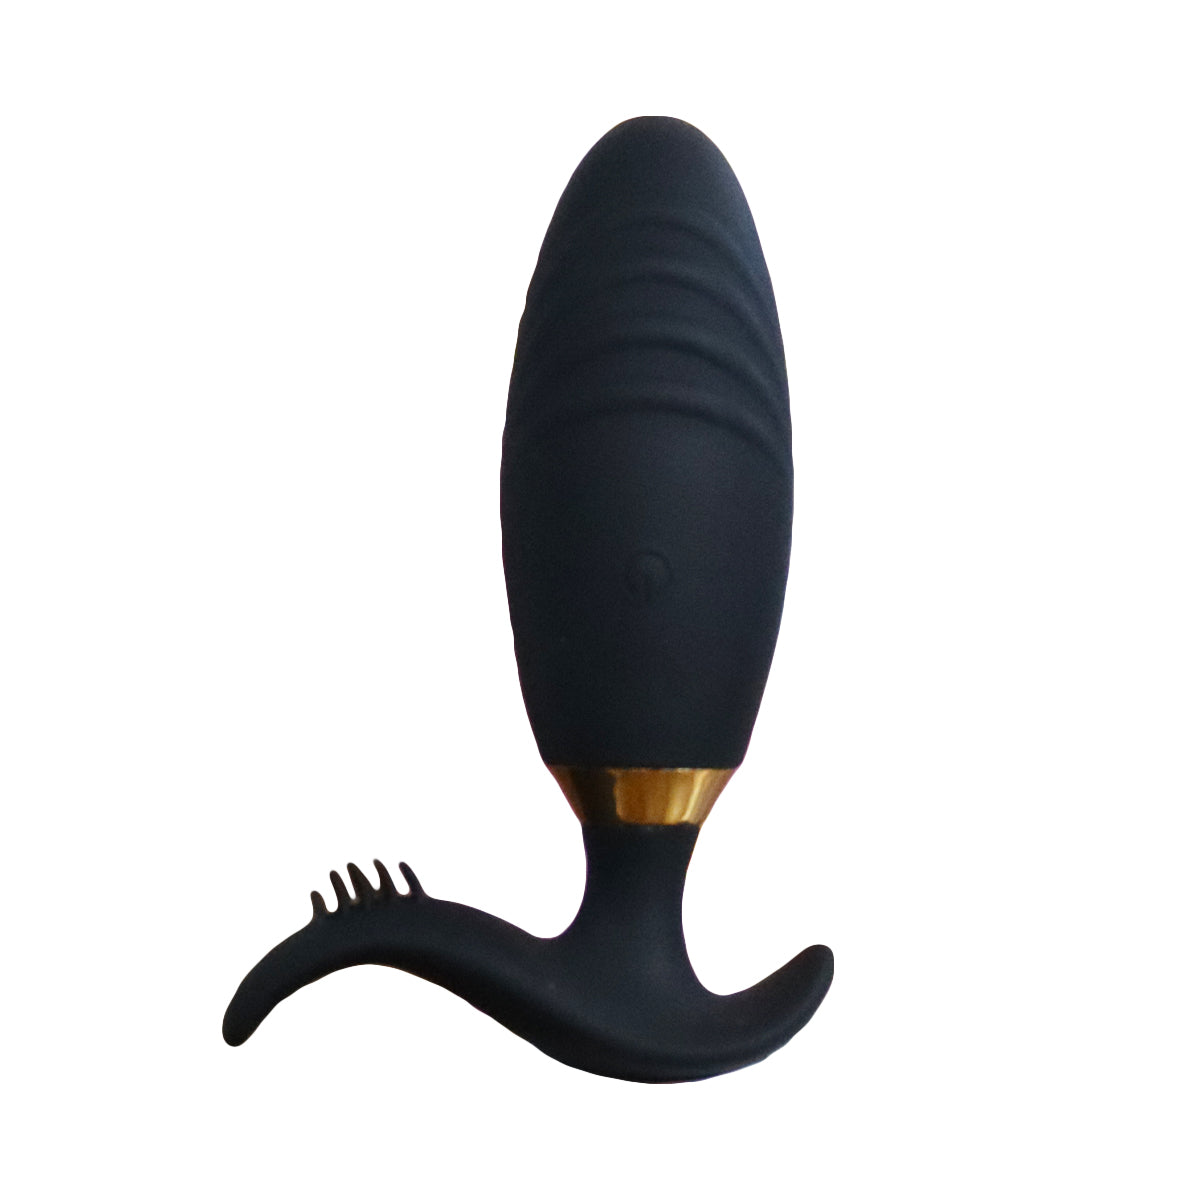 Wireless Egg Vibrator With Remote Control in Pakistan 